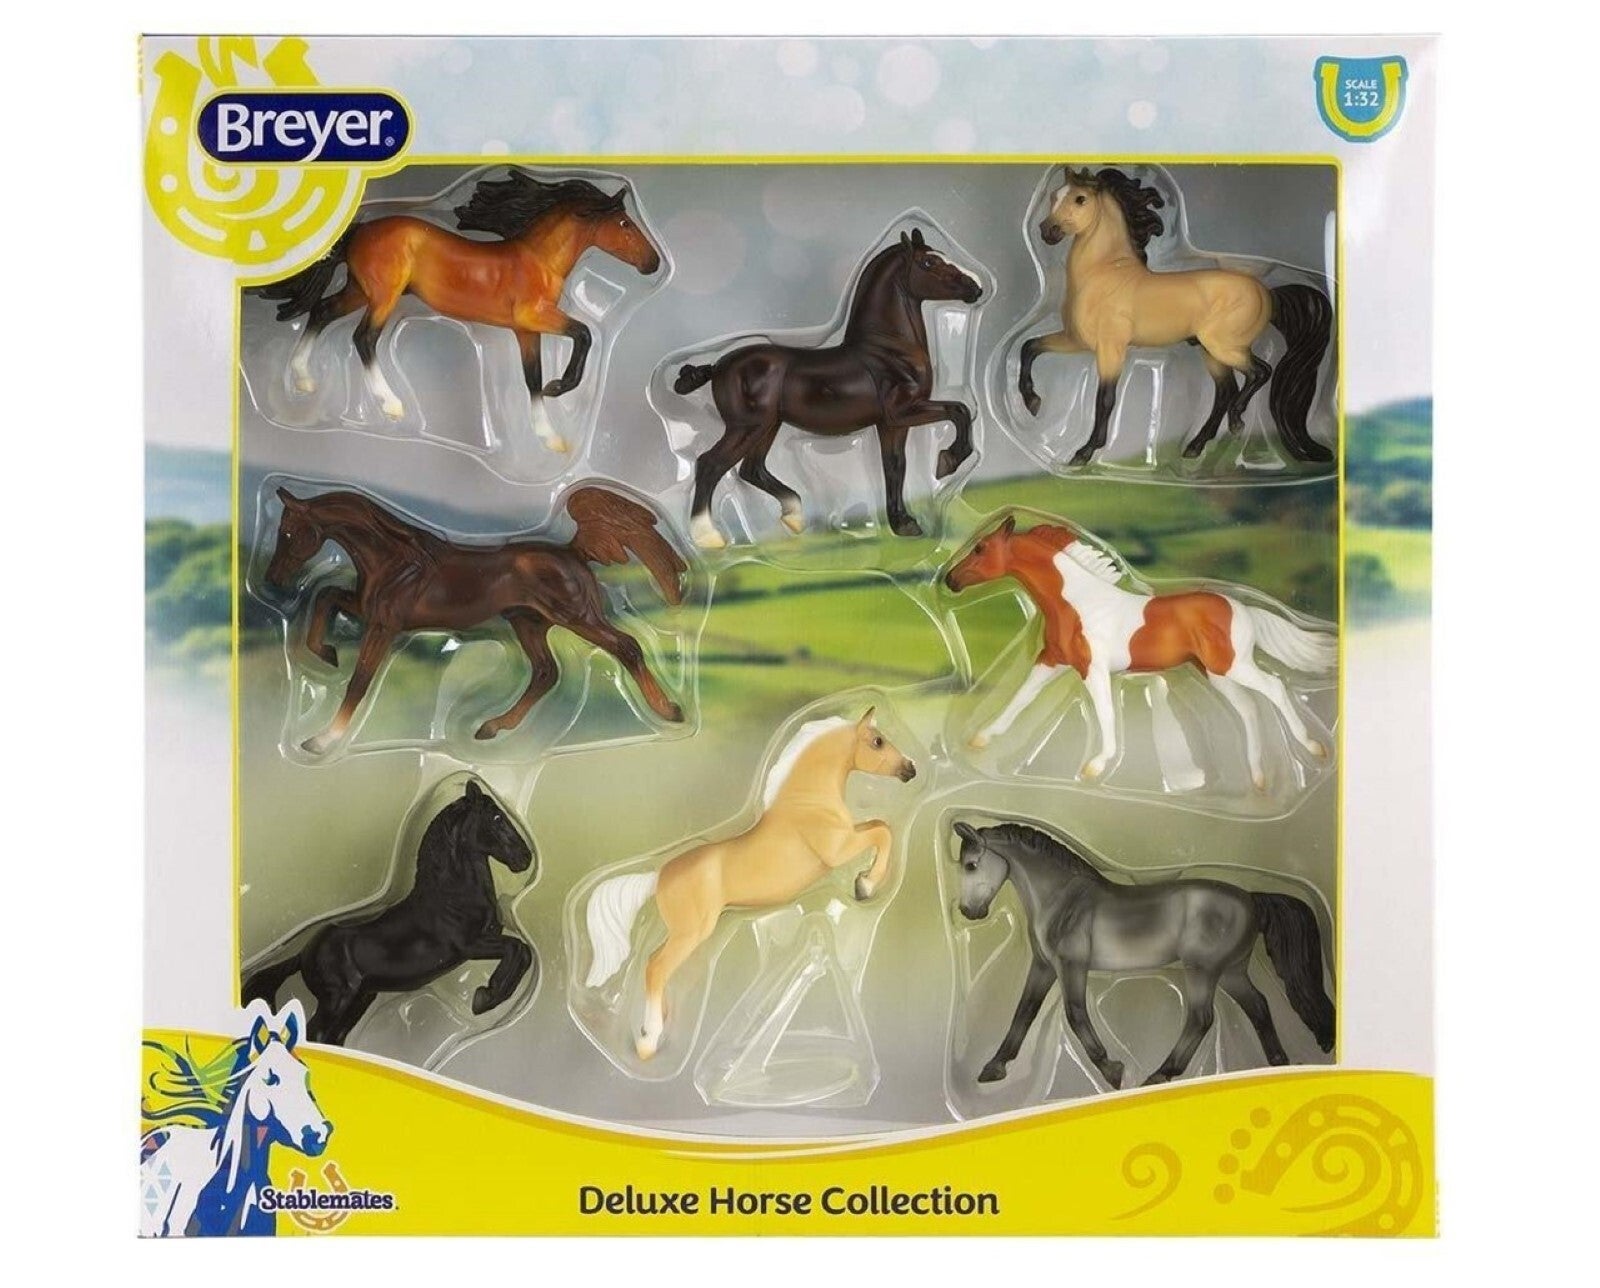 Breyer Horses Deluxe Horse Collection 8 Models 1:32 Stablemates Scale 6058